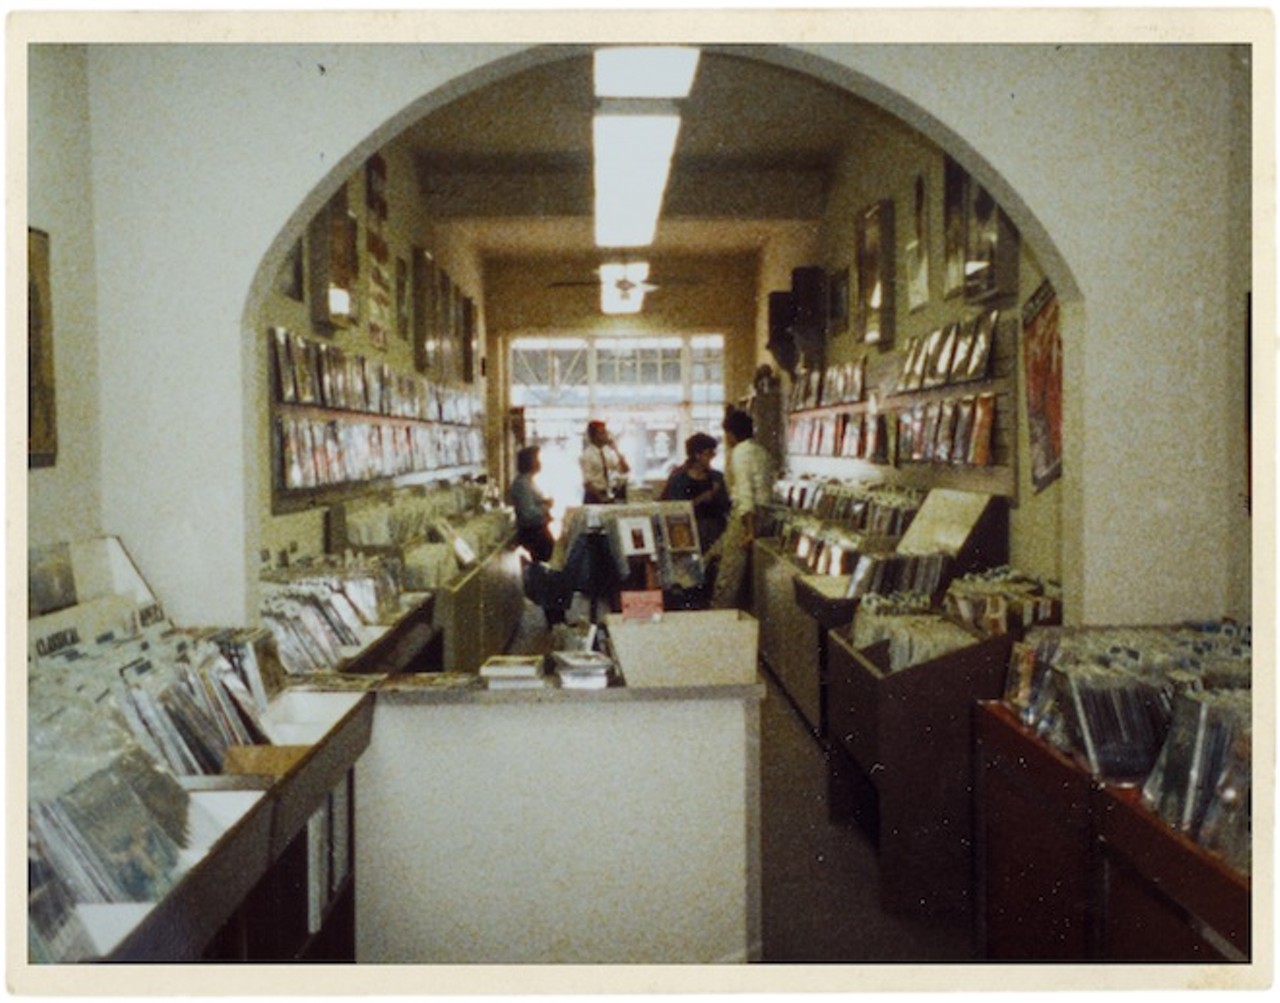 Then and now: Celebrating 30 years of Park Ave CDs through photos